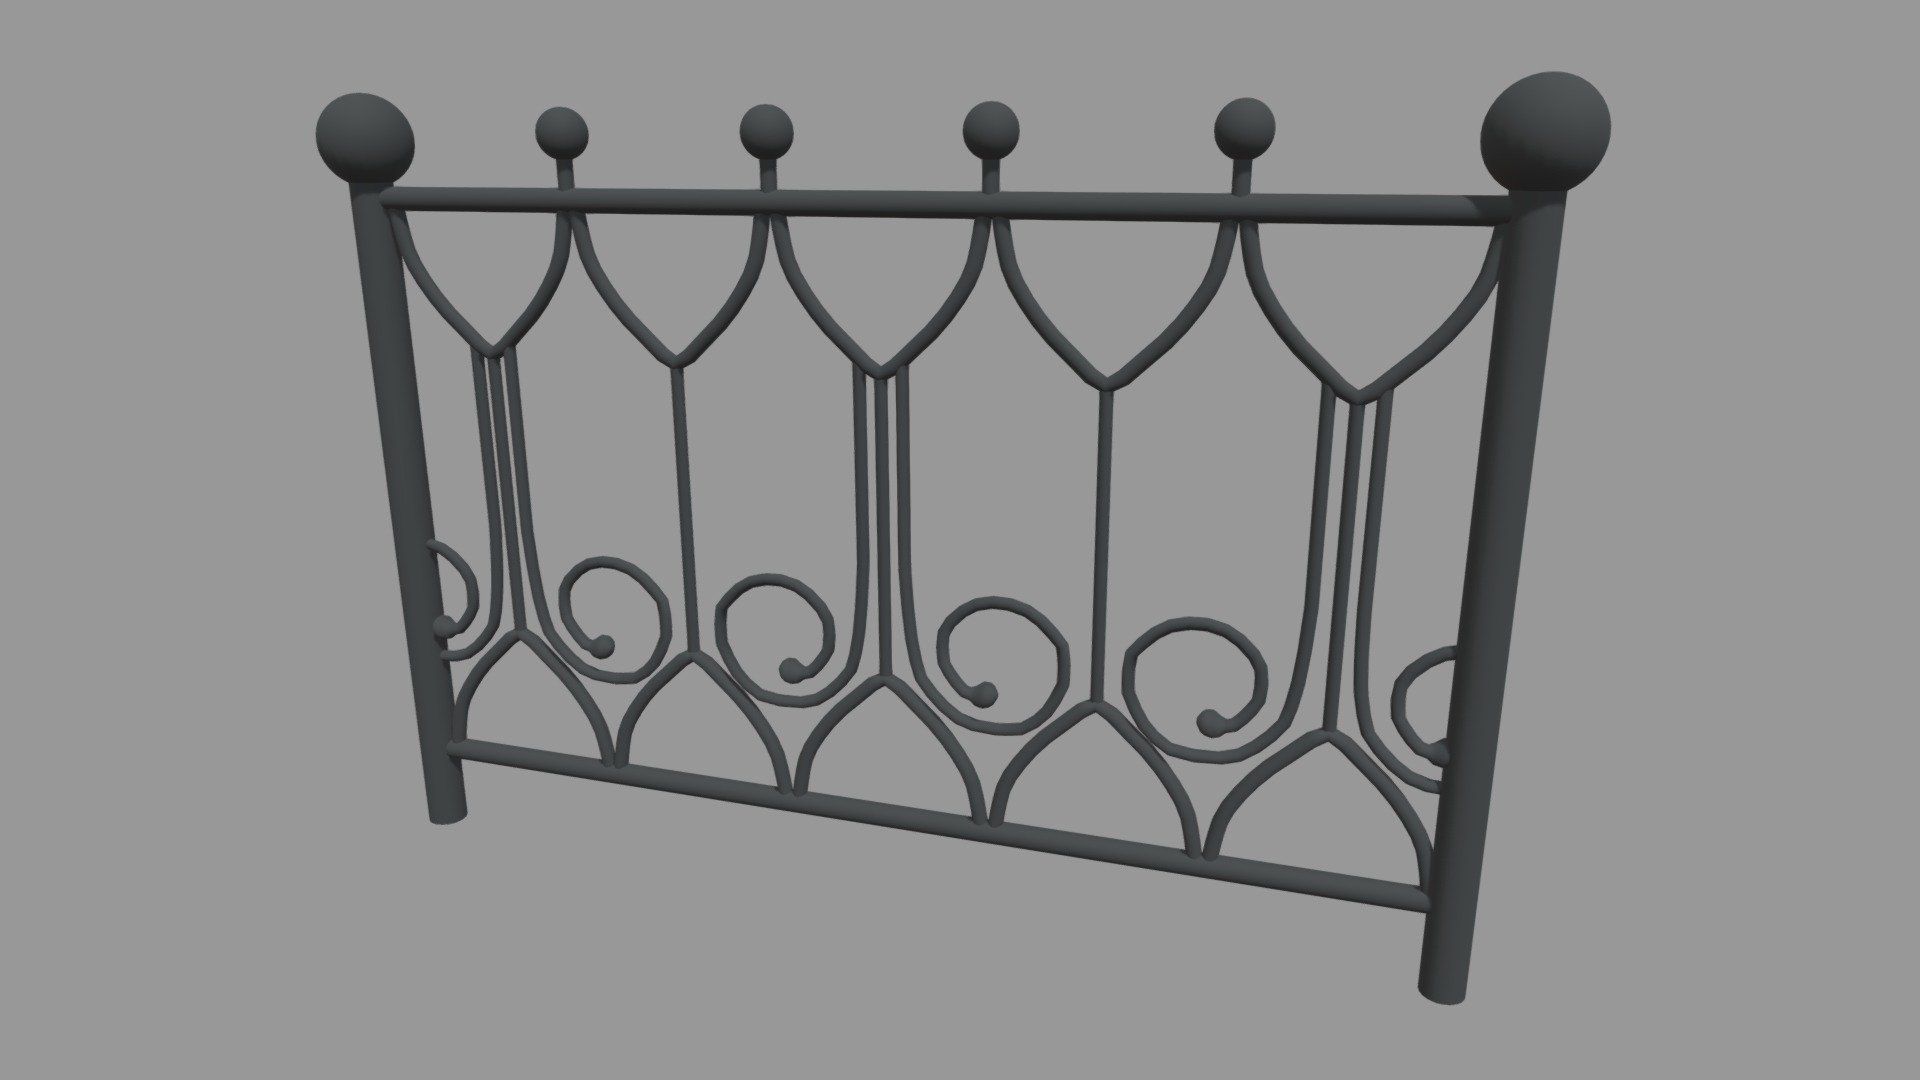 This model contains a Fence 012 based on real city fence which i modeled in Maya 2018. There is one unique material, a black material with one unique UV.

These models will be part of a huge city elements pack which will be added as a big pack and separately on my profile.

If you need any kind of help contact me, i will help you with everything i can. If you like the model please give me some feedback, I would appreciate it.

Don’t doubt on contacting me, i would be very happy to help. If you experience any kind of difficulties, be sure to contact me and i will help you. Sincerely Yours, ViperJr3D - Fence 012 - Buy Royalty Free 3D model by ViperJr3D 3d model